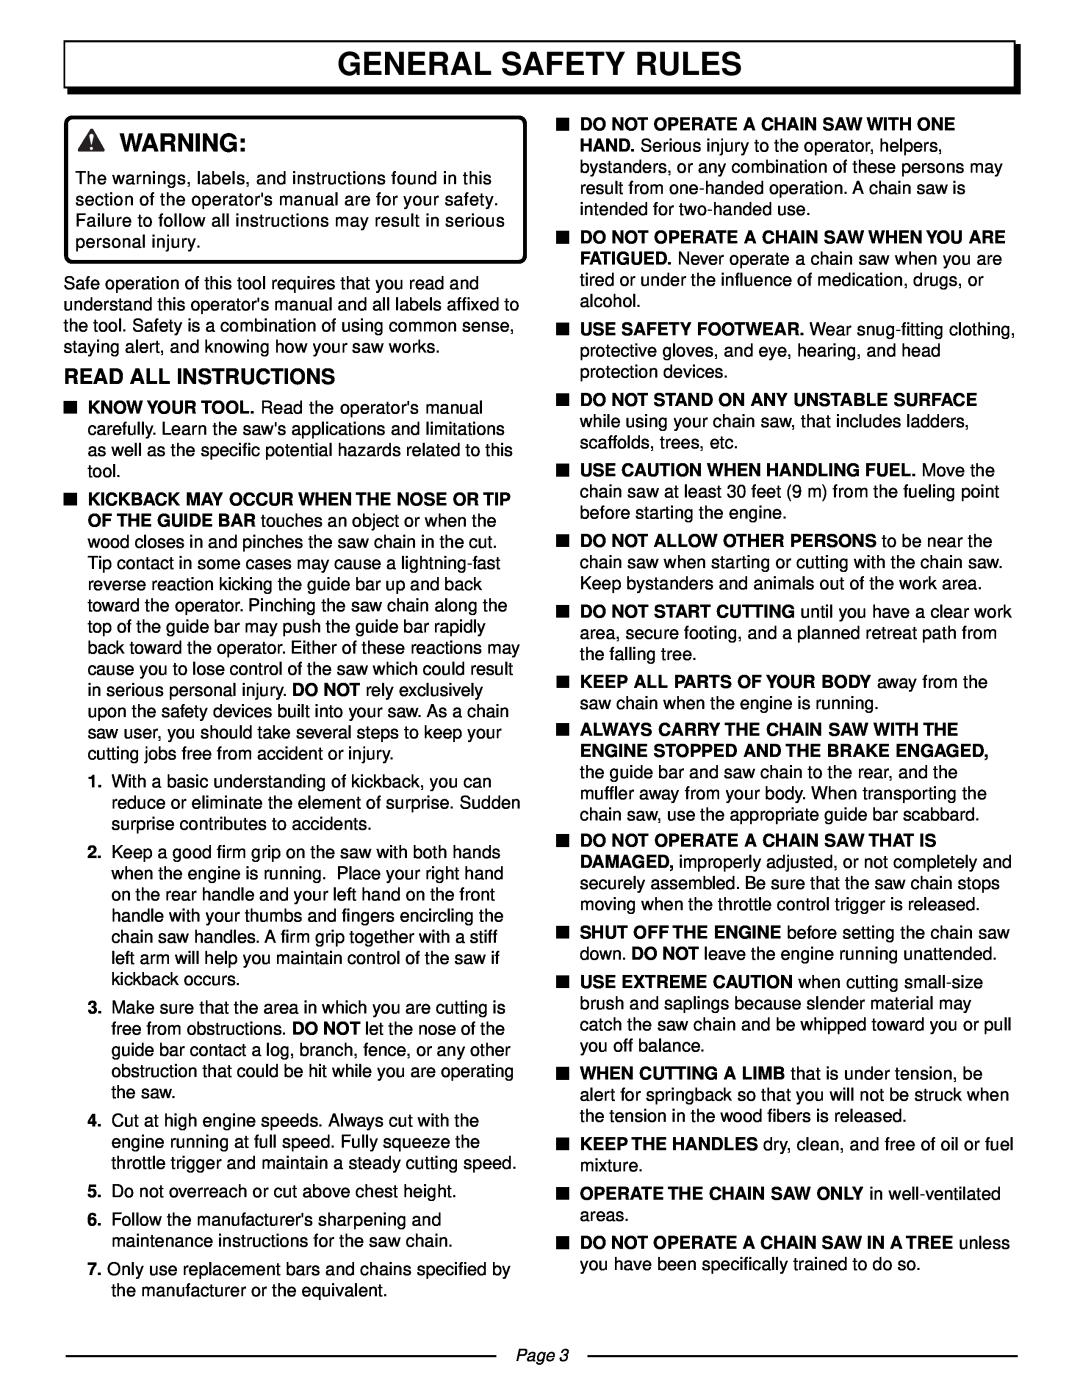 Homelite UT10510 manual General Safety Rules, Read All Instructions, Page 